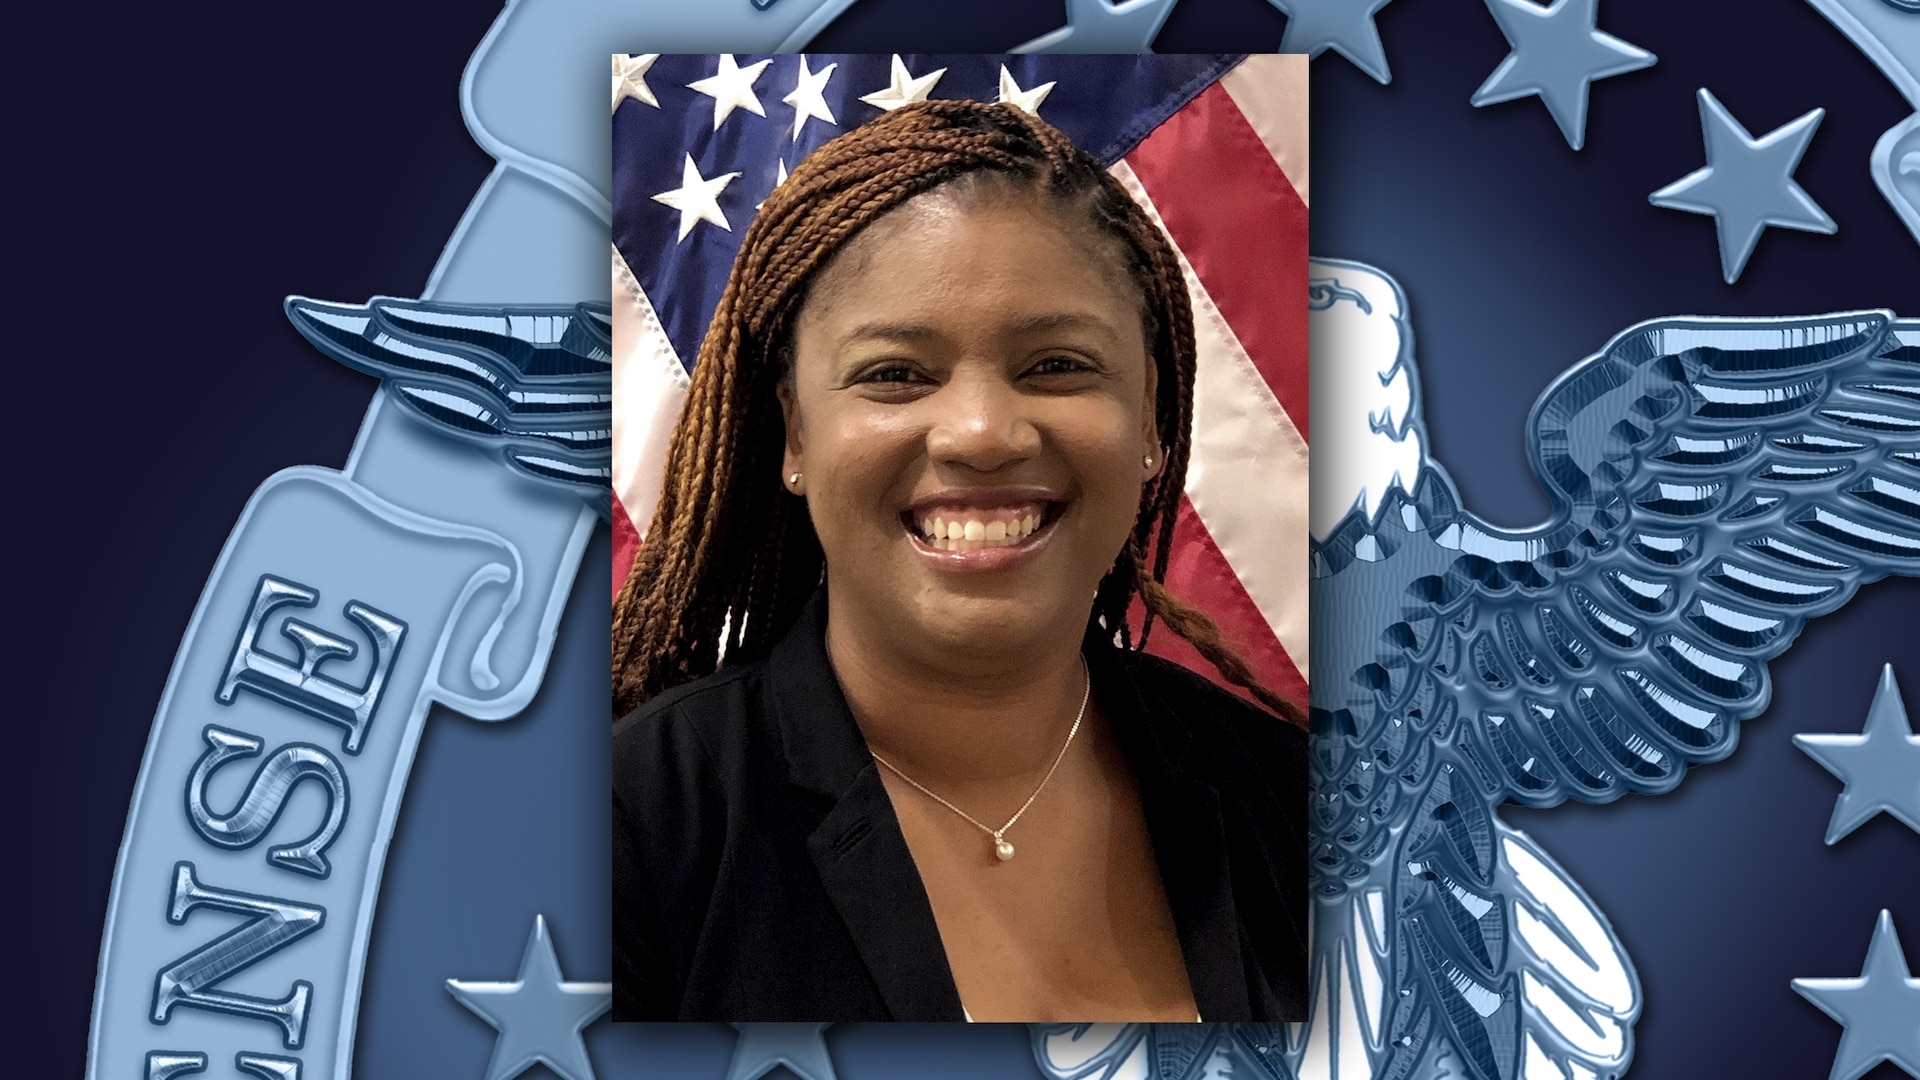 Head and shoulders picture of a Black woman in black shirt in front of the US flag.